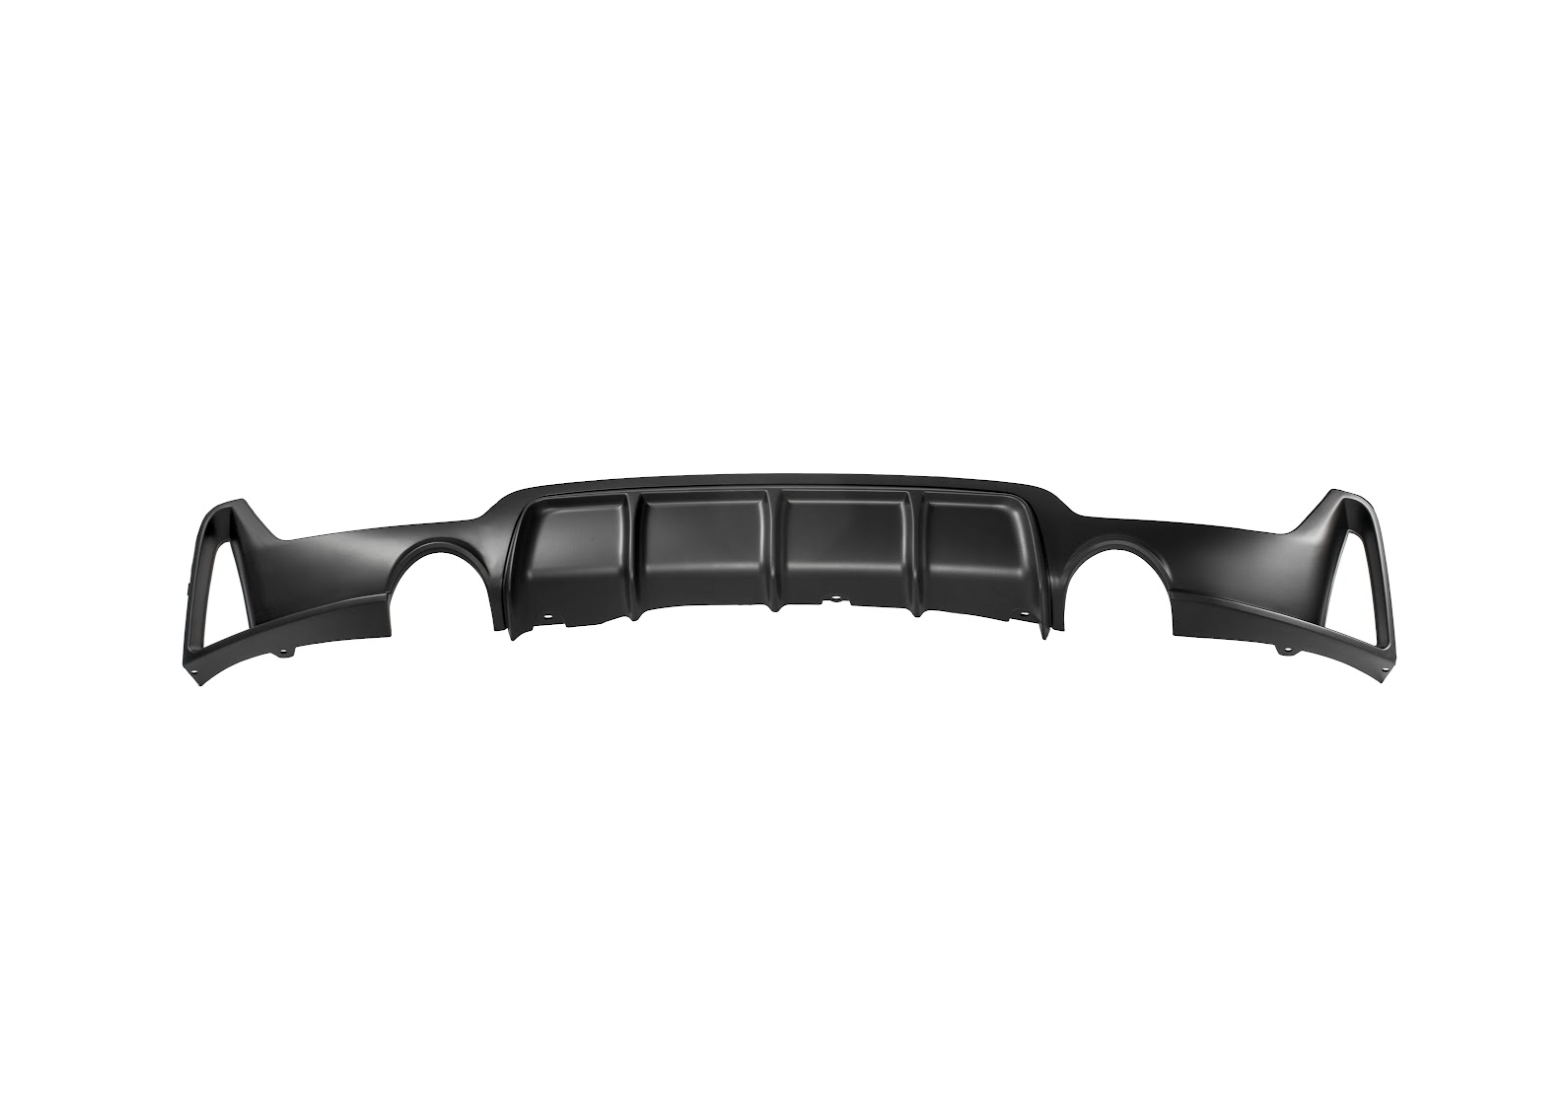 Zero Offset  M Performance Style Rear Diffuser for BMW 4 Series (F32) 13-19 - MODE Auto Concepts